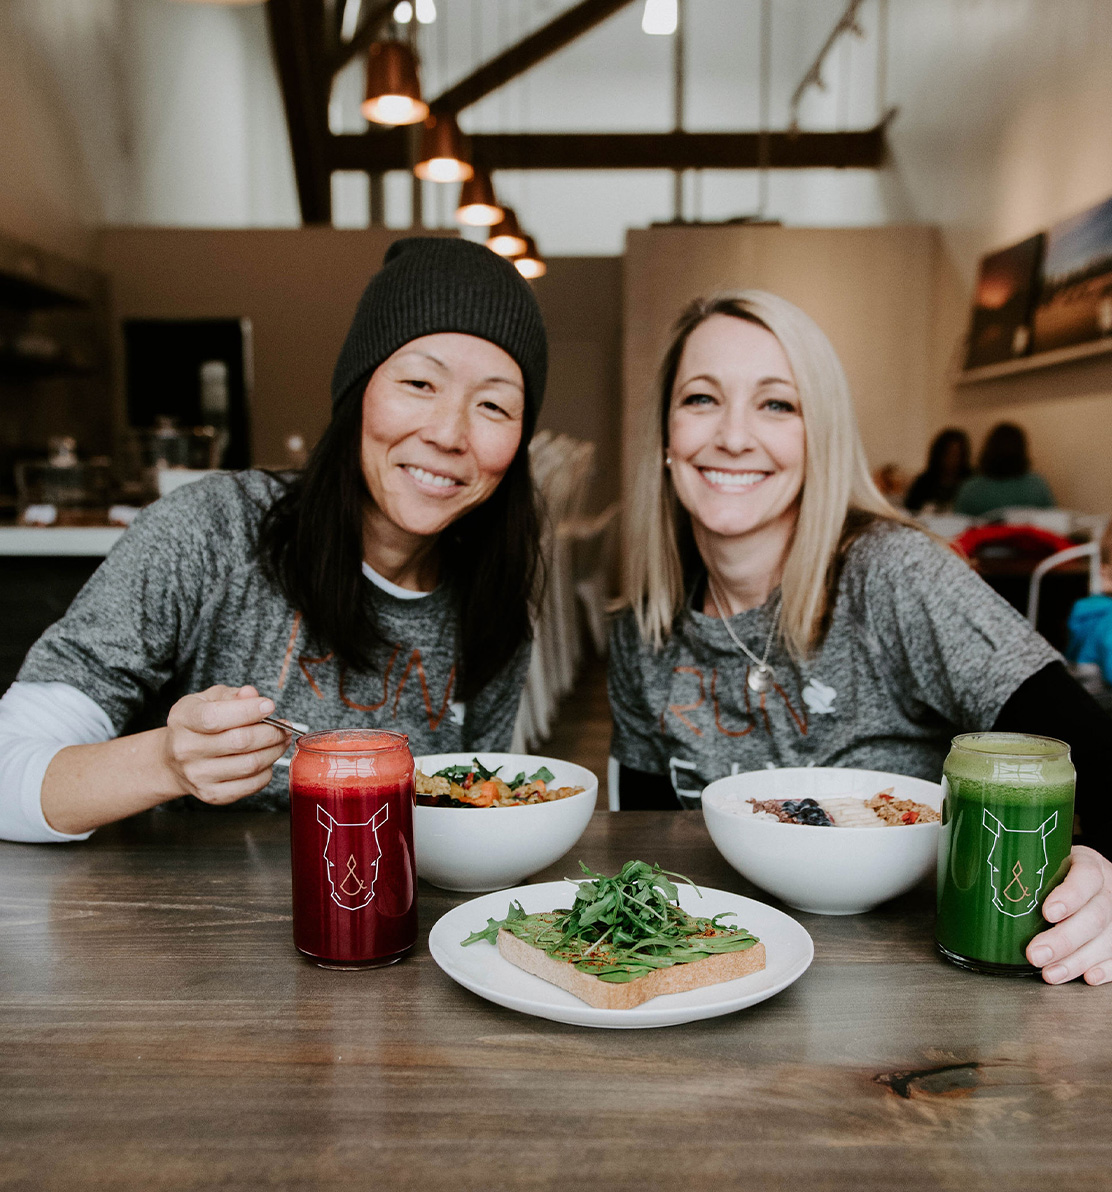 Fix & Repeat owners, Leila and Kristin, enjoying a cold-pressed juice and plant-based meal at the restuarant